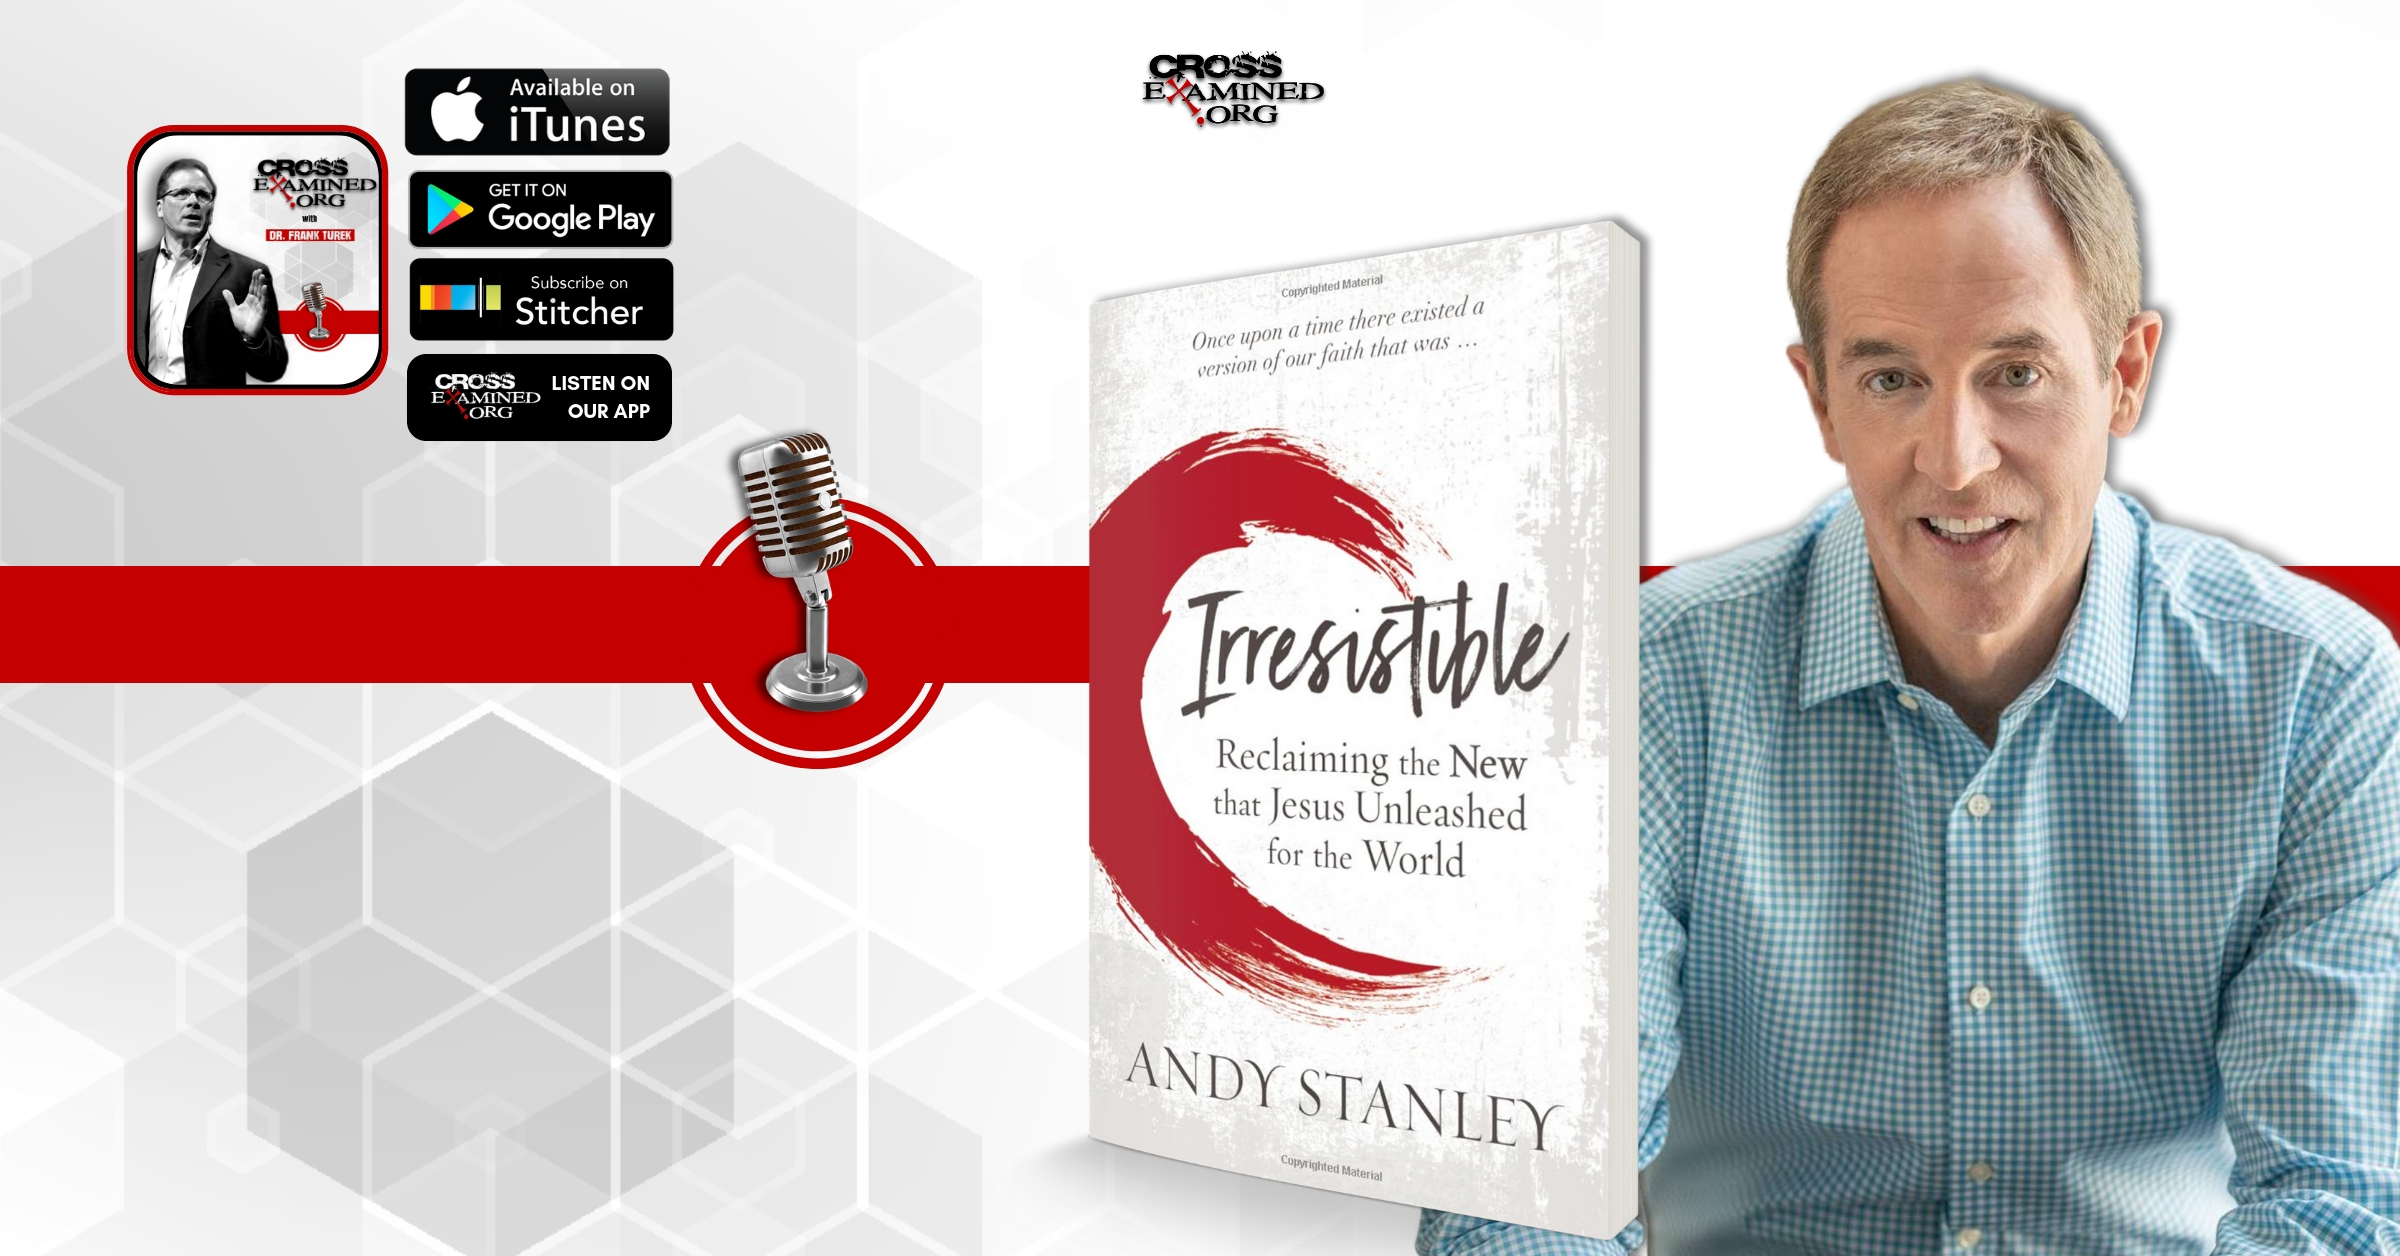 Irresistible: Reclaiming the New that Jesus Unleashed